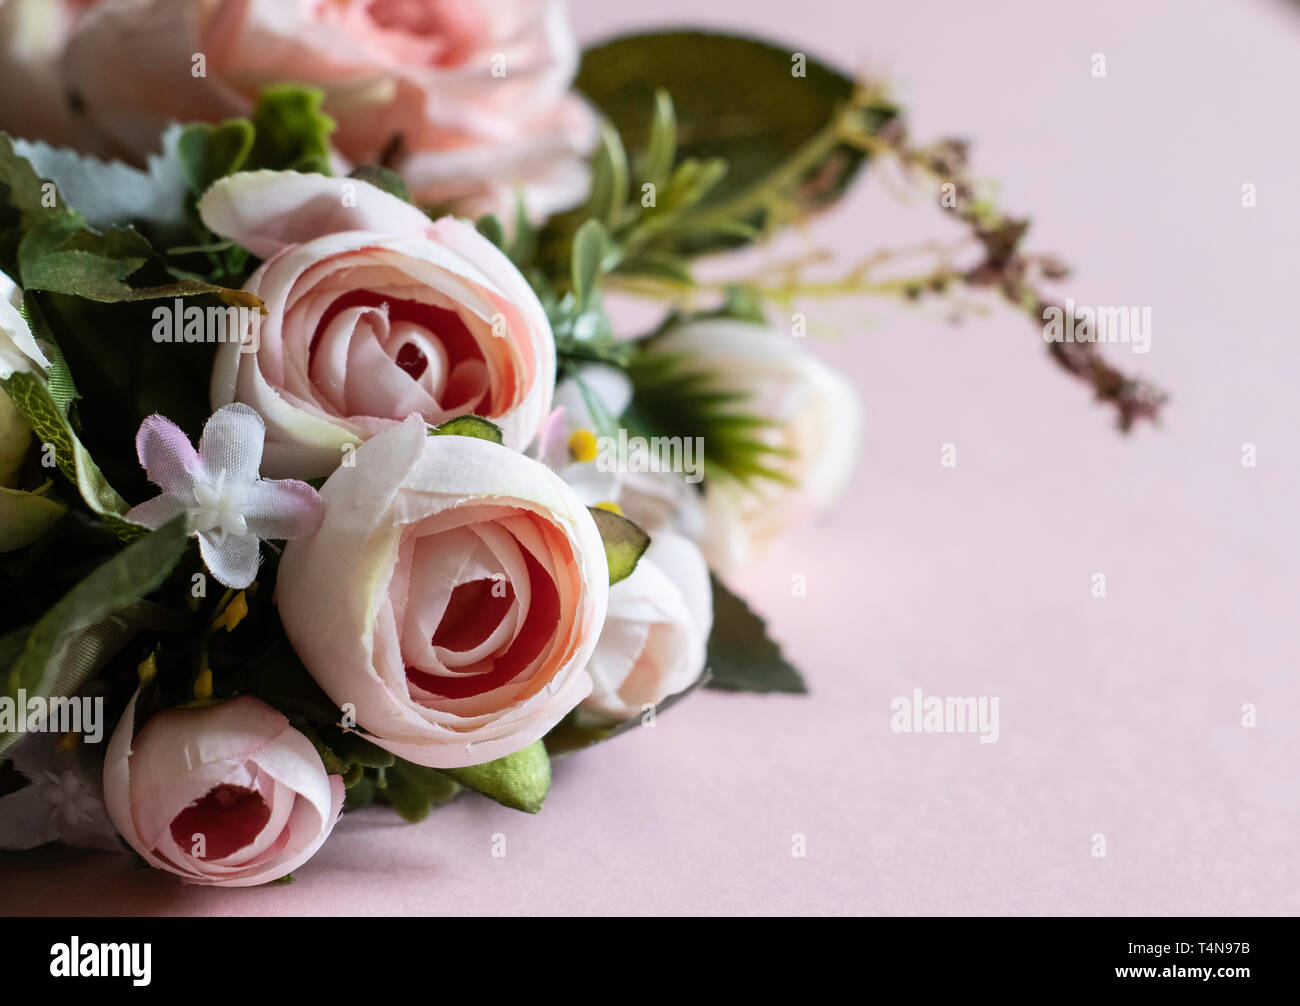 Funeral Background Stock Photos - 104,227 Images